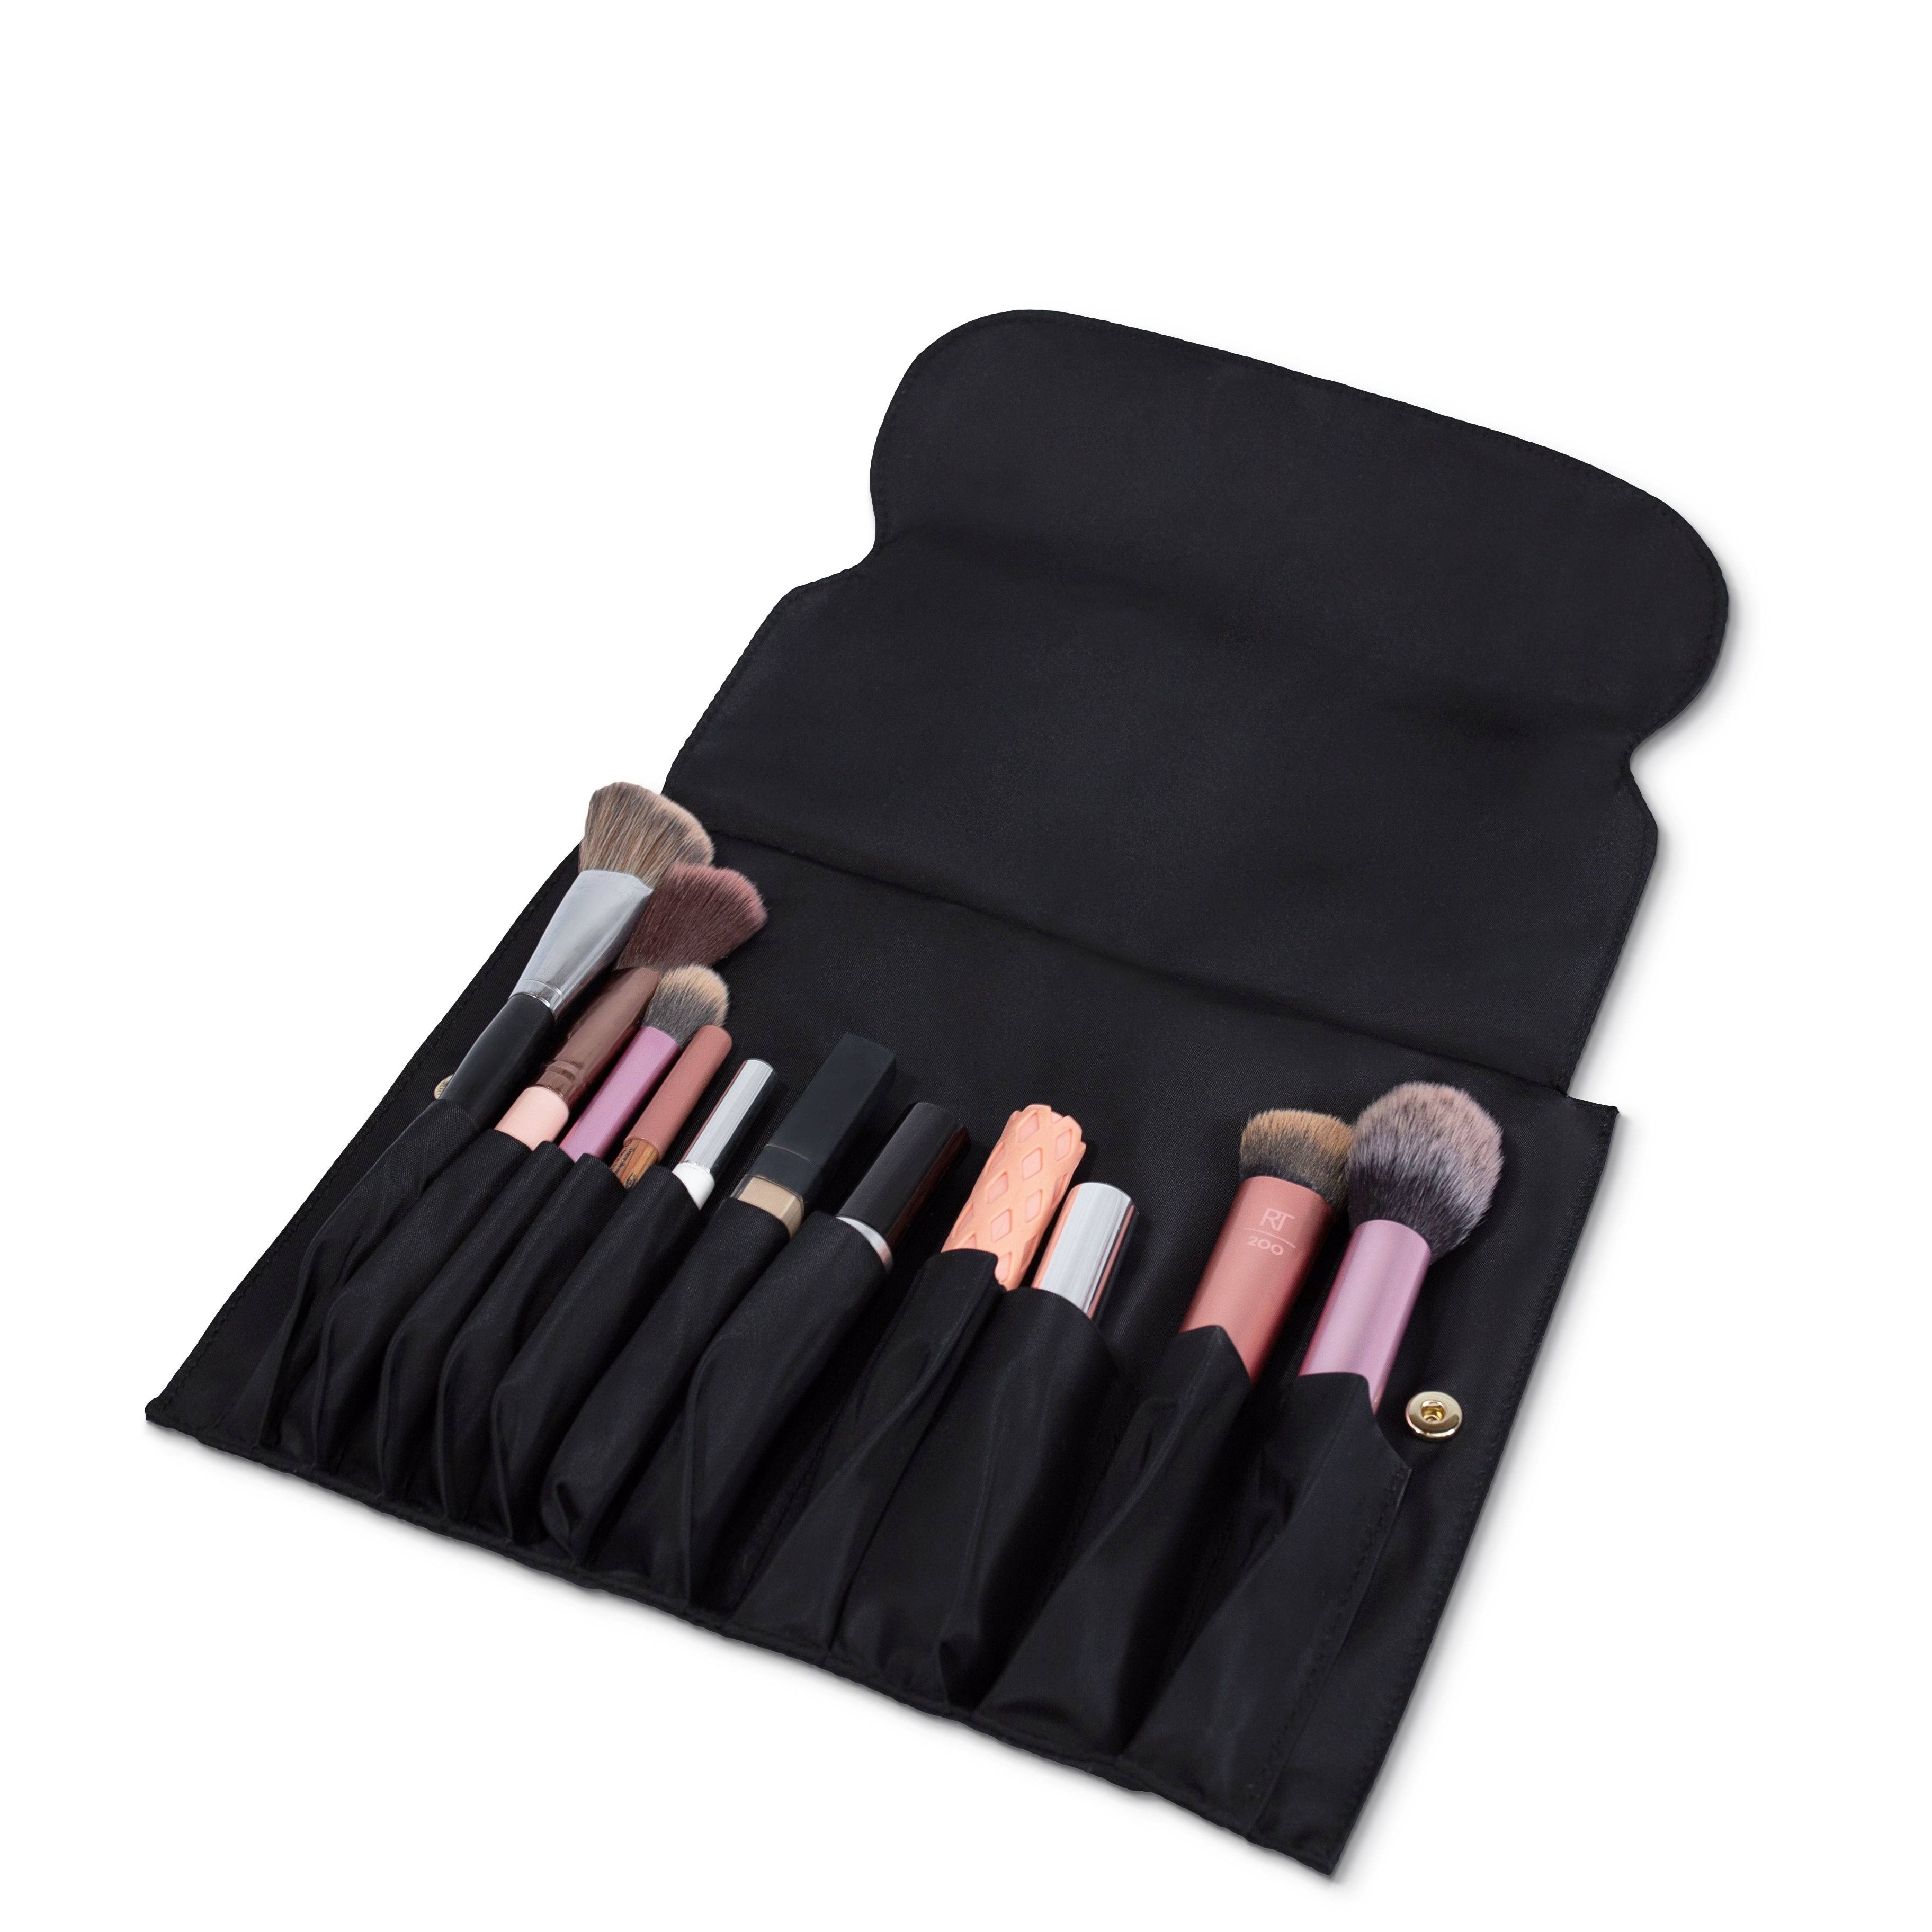 KUSSHI Washable Travel Snap in A Brush Organizer (Makeup Not Included)